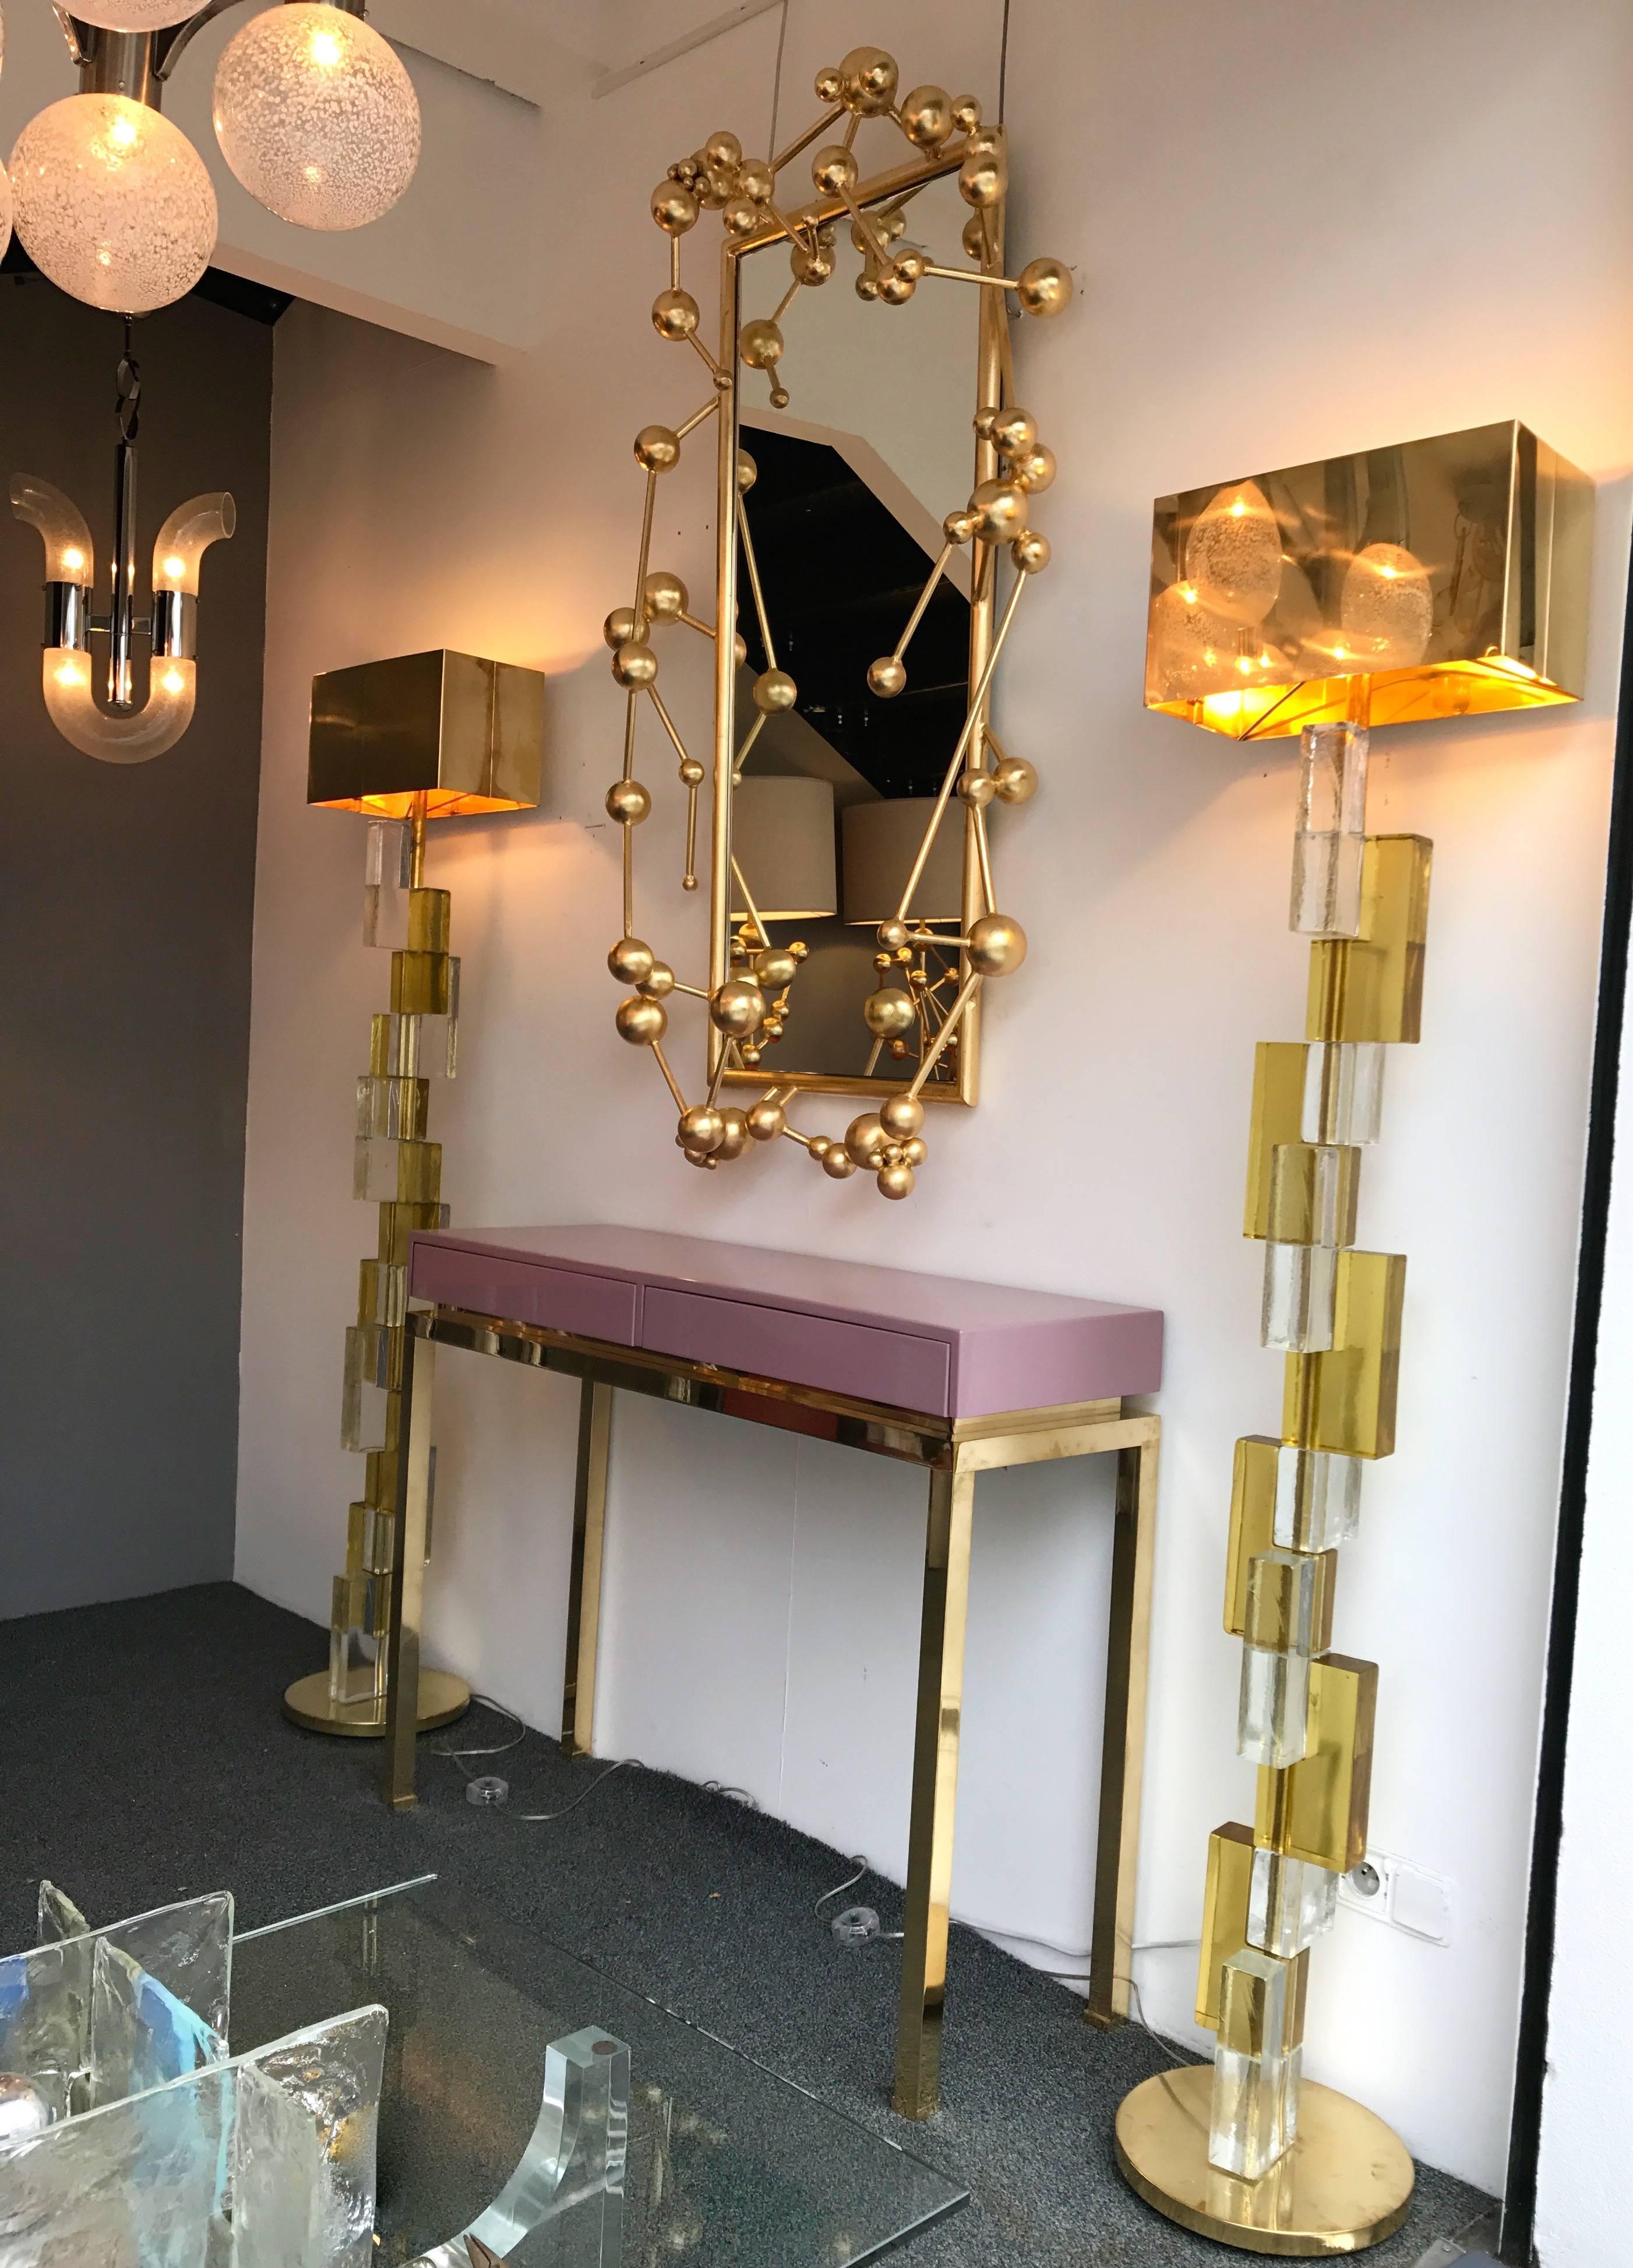 Atomic mirror by the artist designer Antonio Cagianelli. Production edition Stanislas Reboul Gallery, limited edition 7 exemplary. Artisanal handmade Atomic work, wrought iron, gold leaf finition. Very sculptural, the atomes passed through the